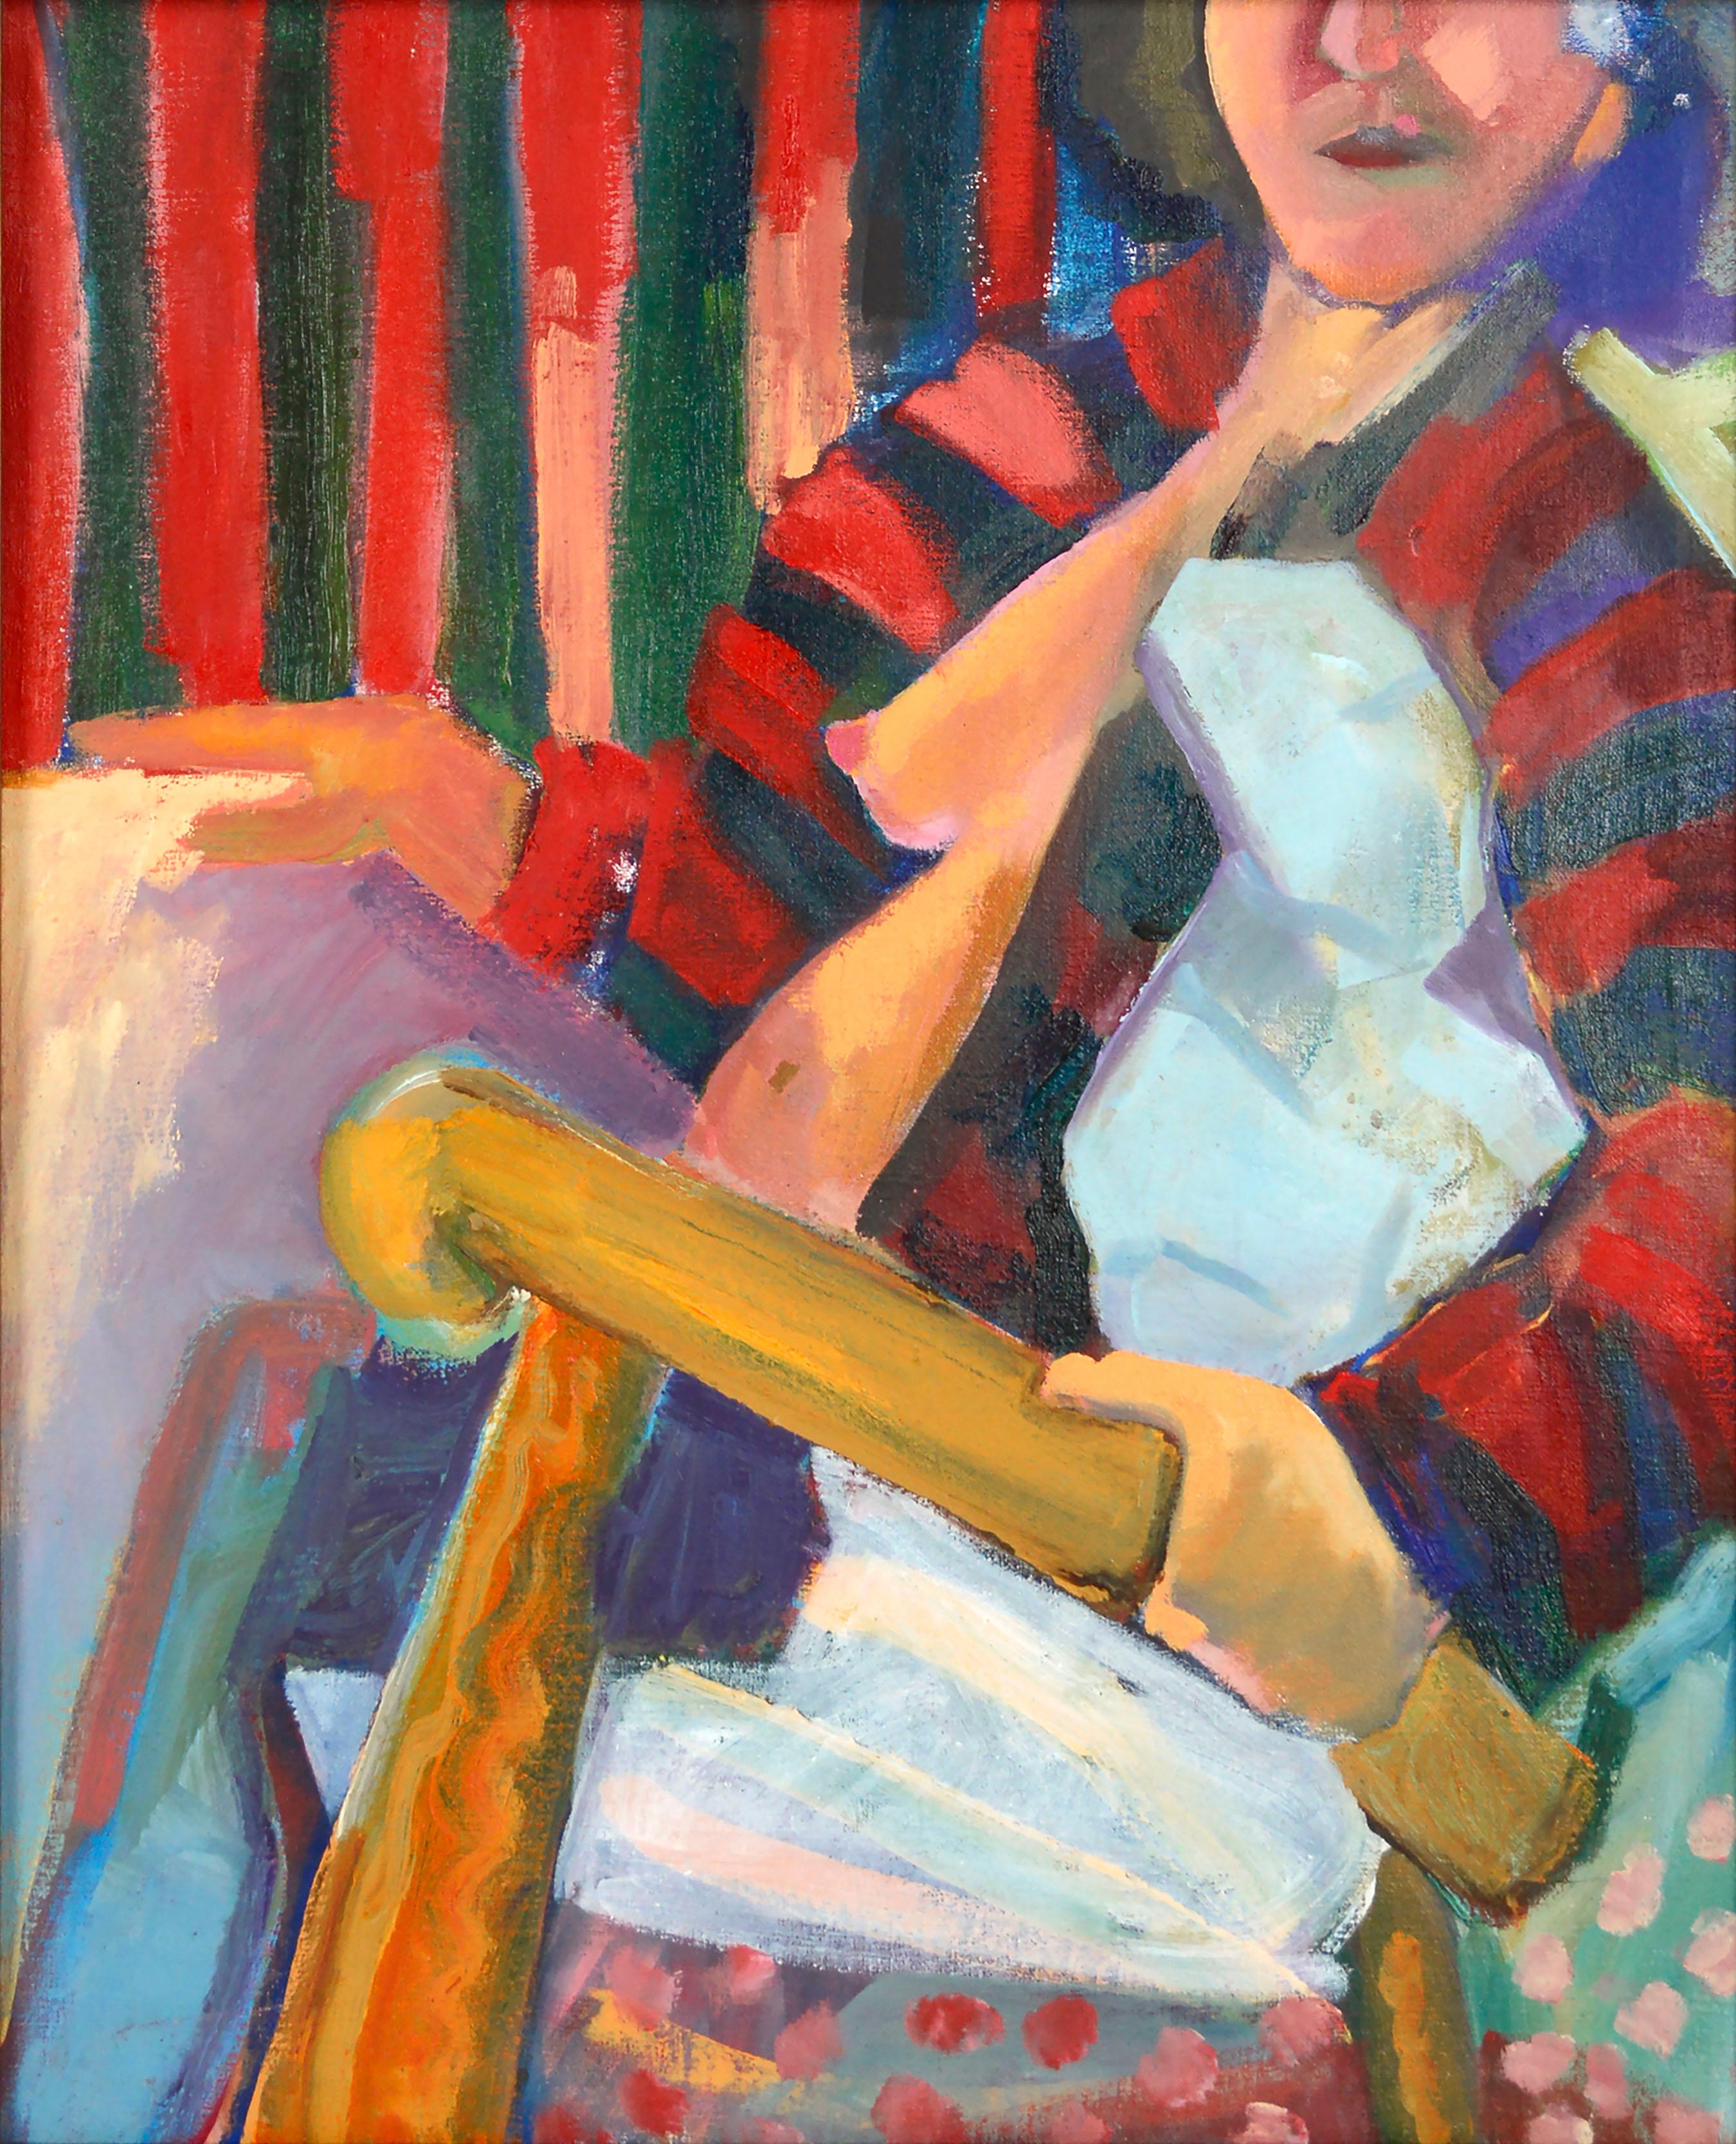 Woman in an Armchair, Modernist Bay Area Figurative with Primary Colors - Painting by Kristin Cohen